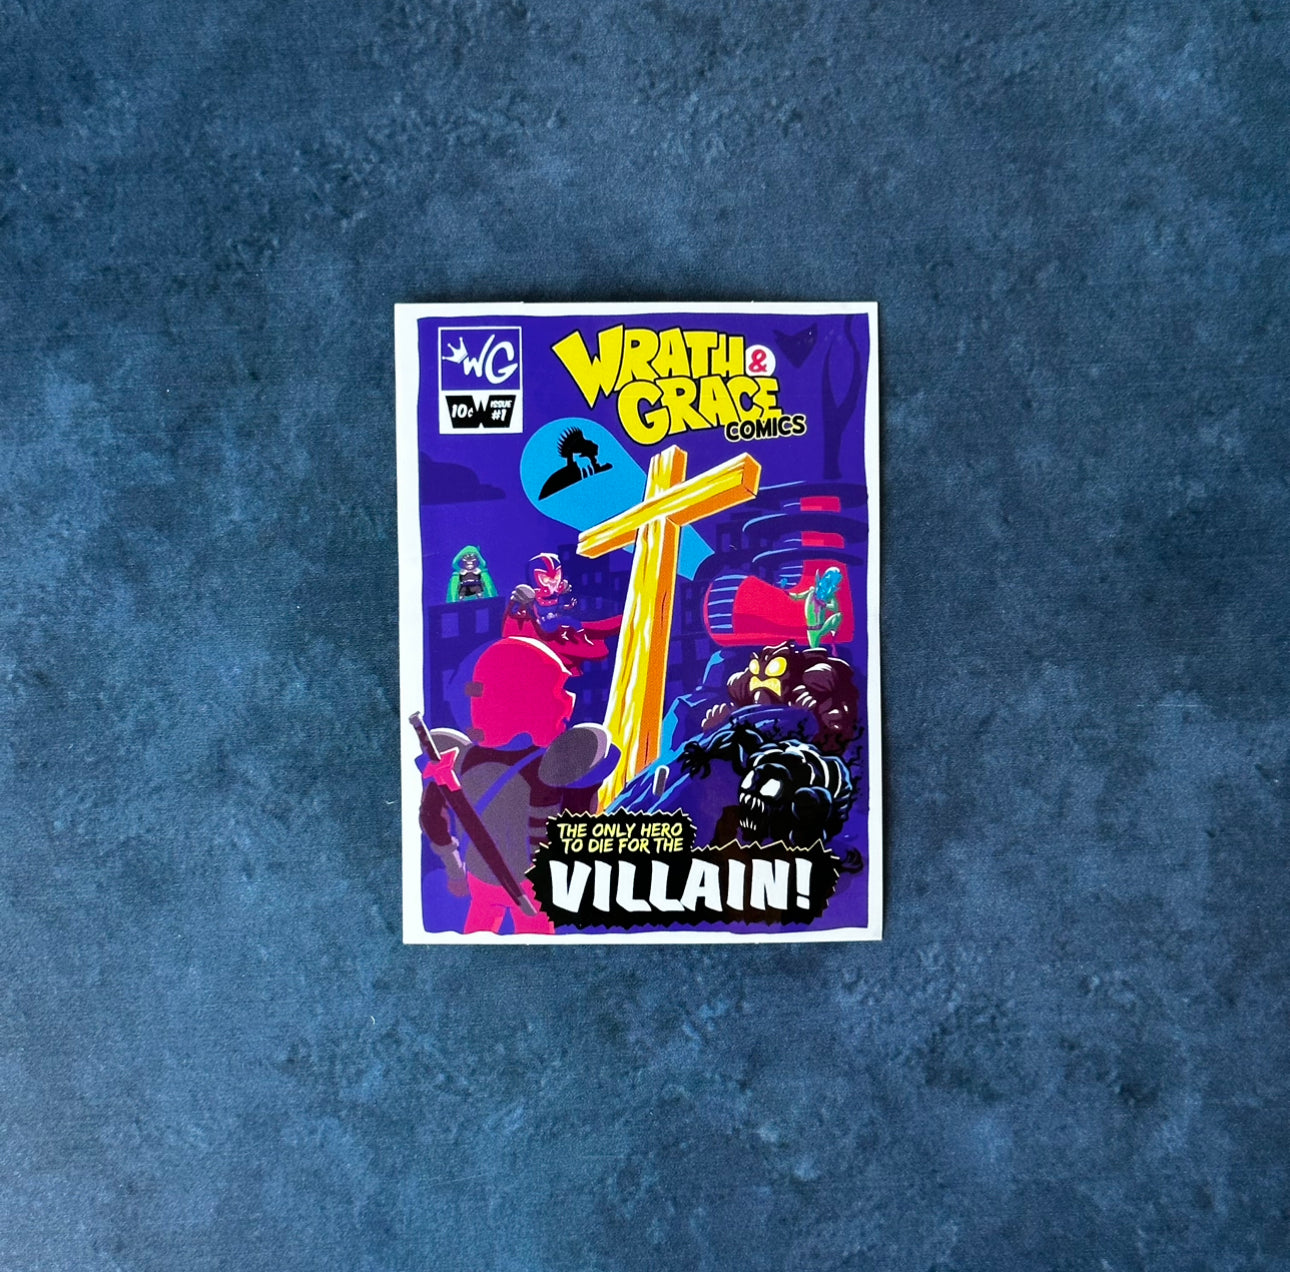 The Only Hero To Die For The Villain - Sticker